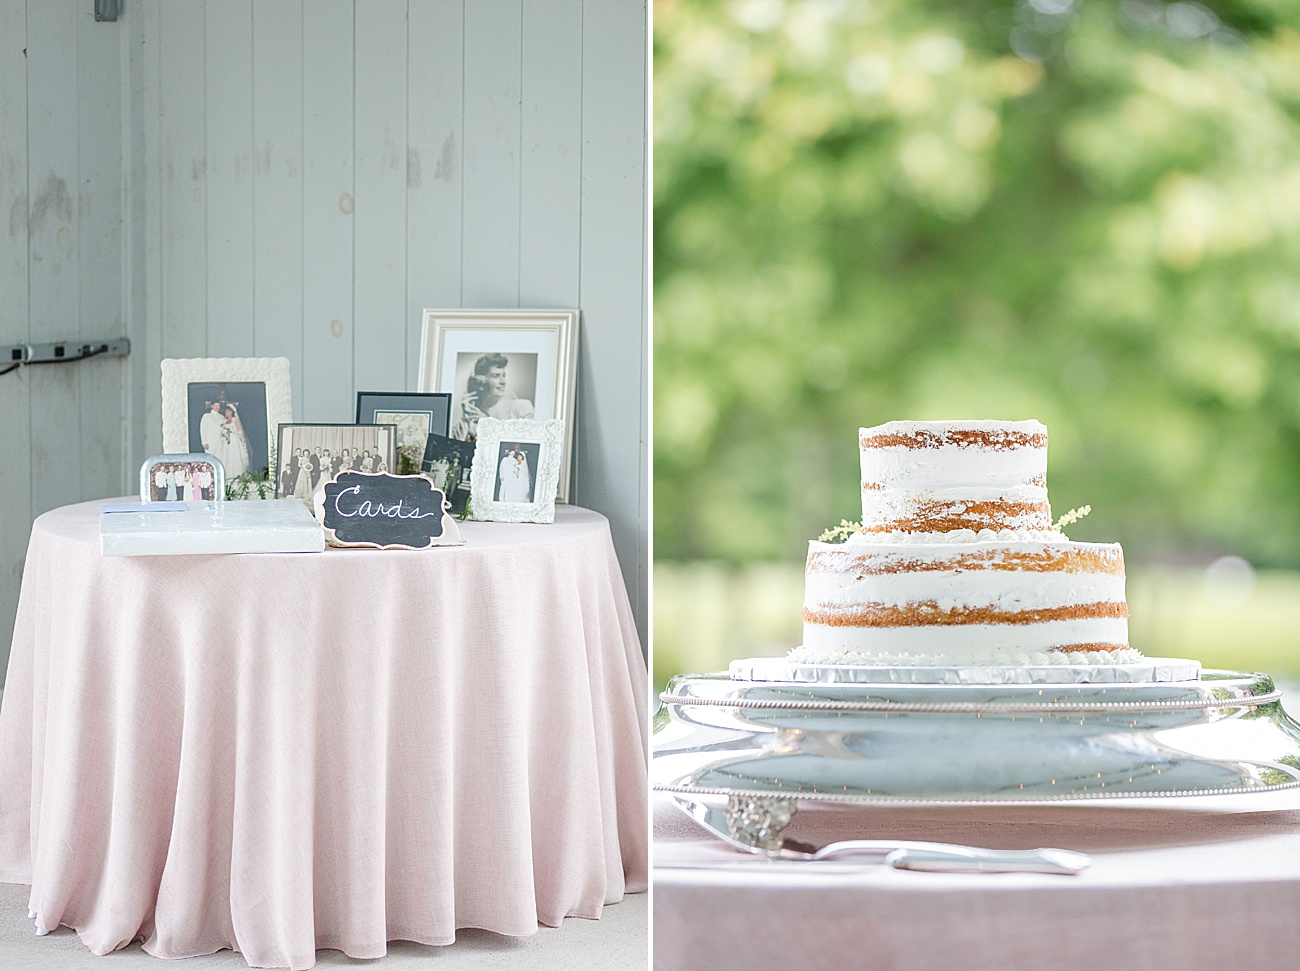 Cake and details at Parmelee Farm Wedding in Killingworth CT by Jamerlyn Brown Photography